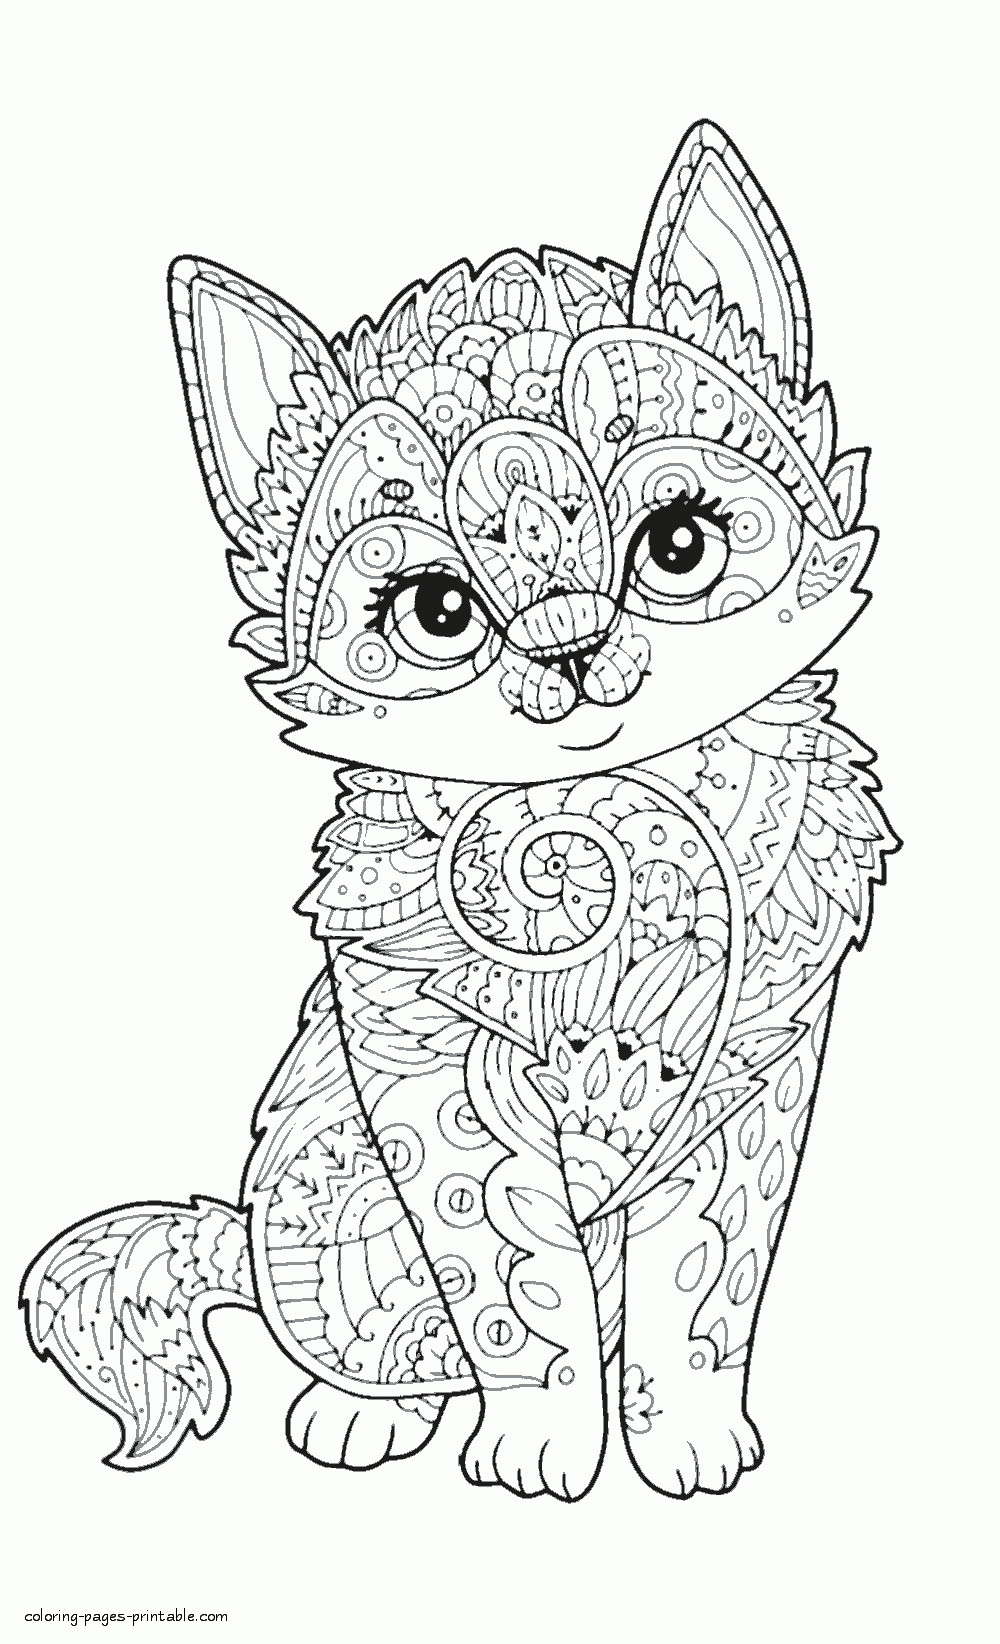 The Best Ideas for Cute Animal Coloring Pages for Adults - Home, Family